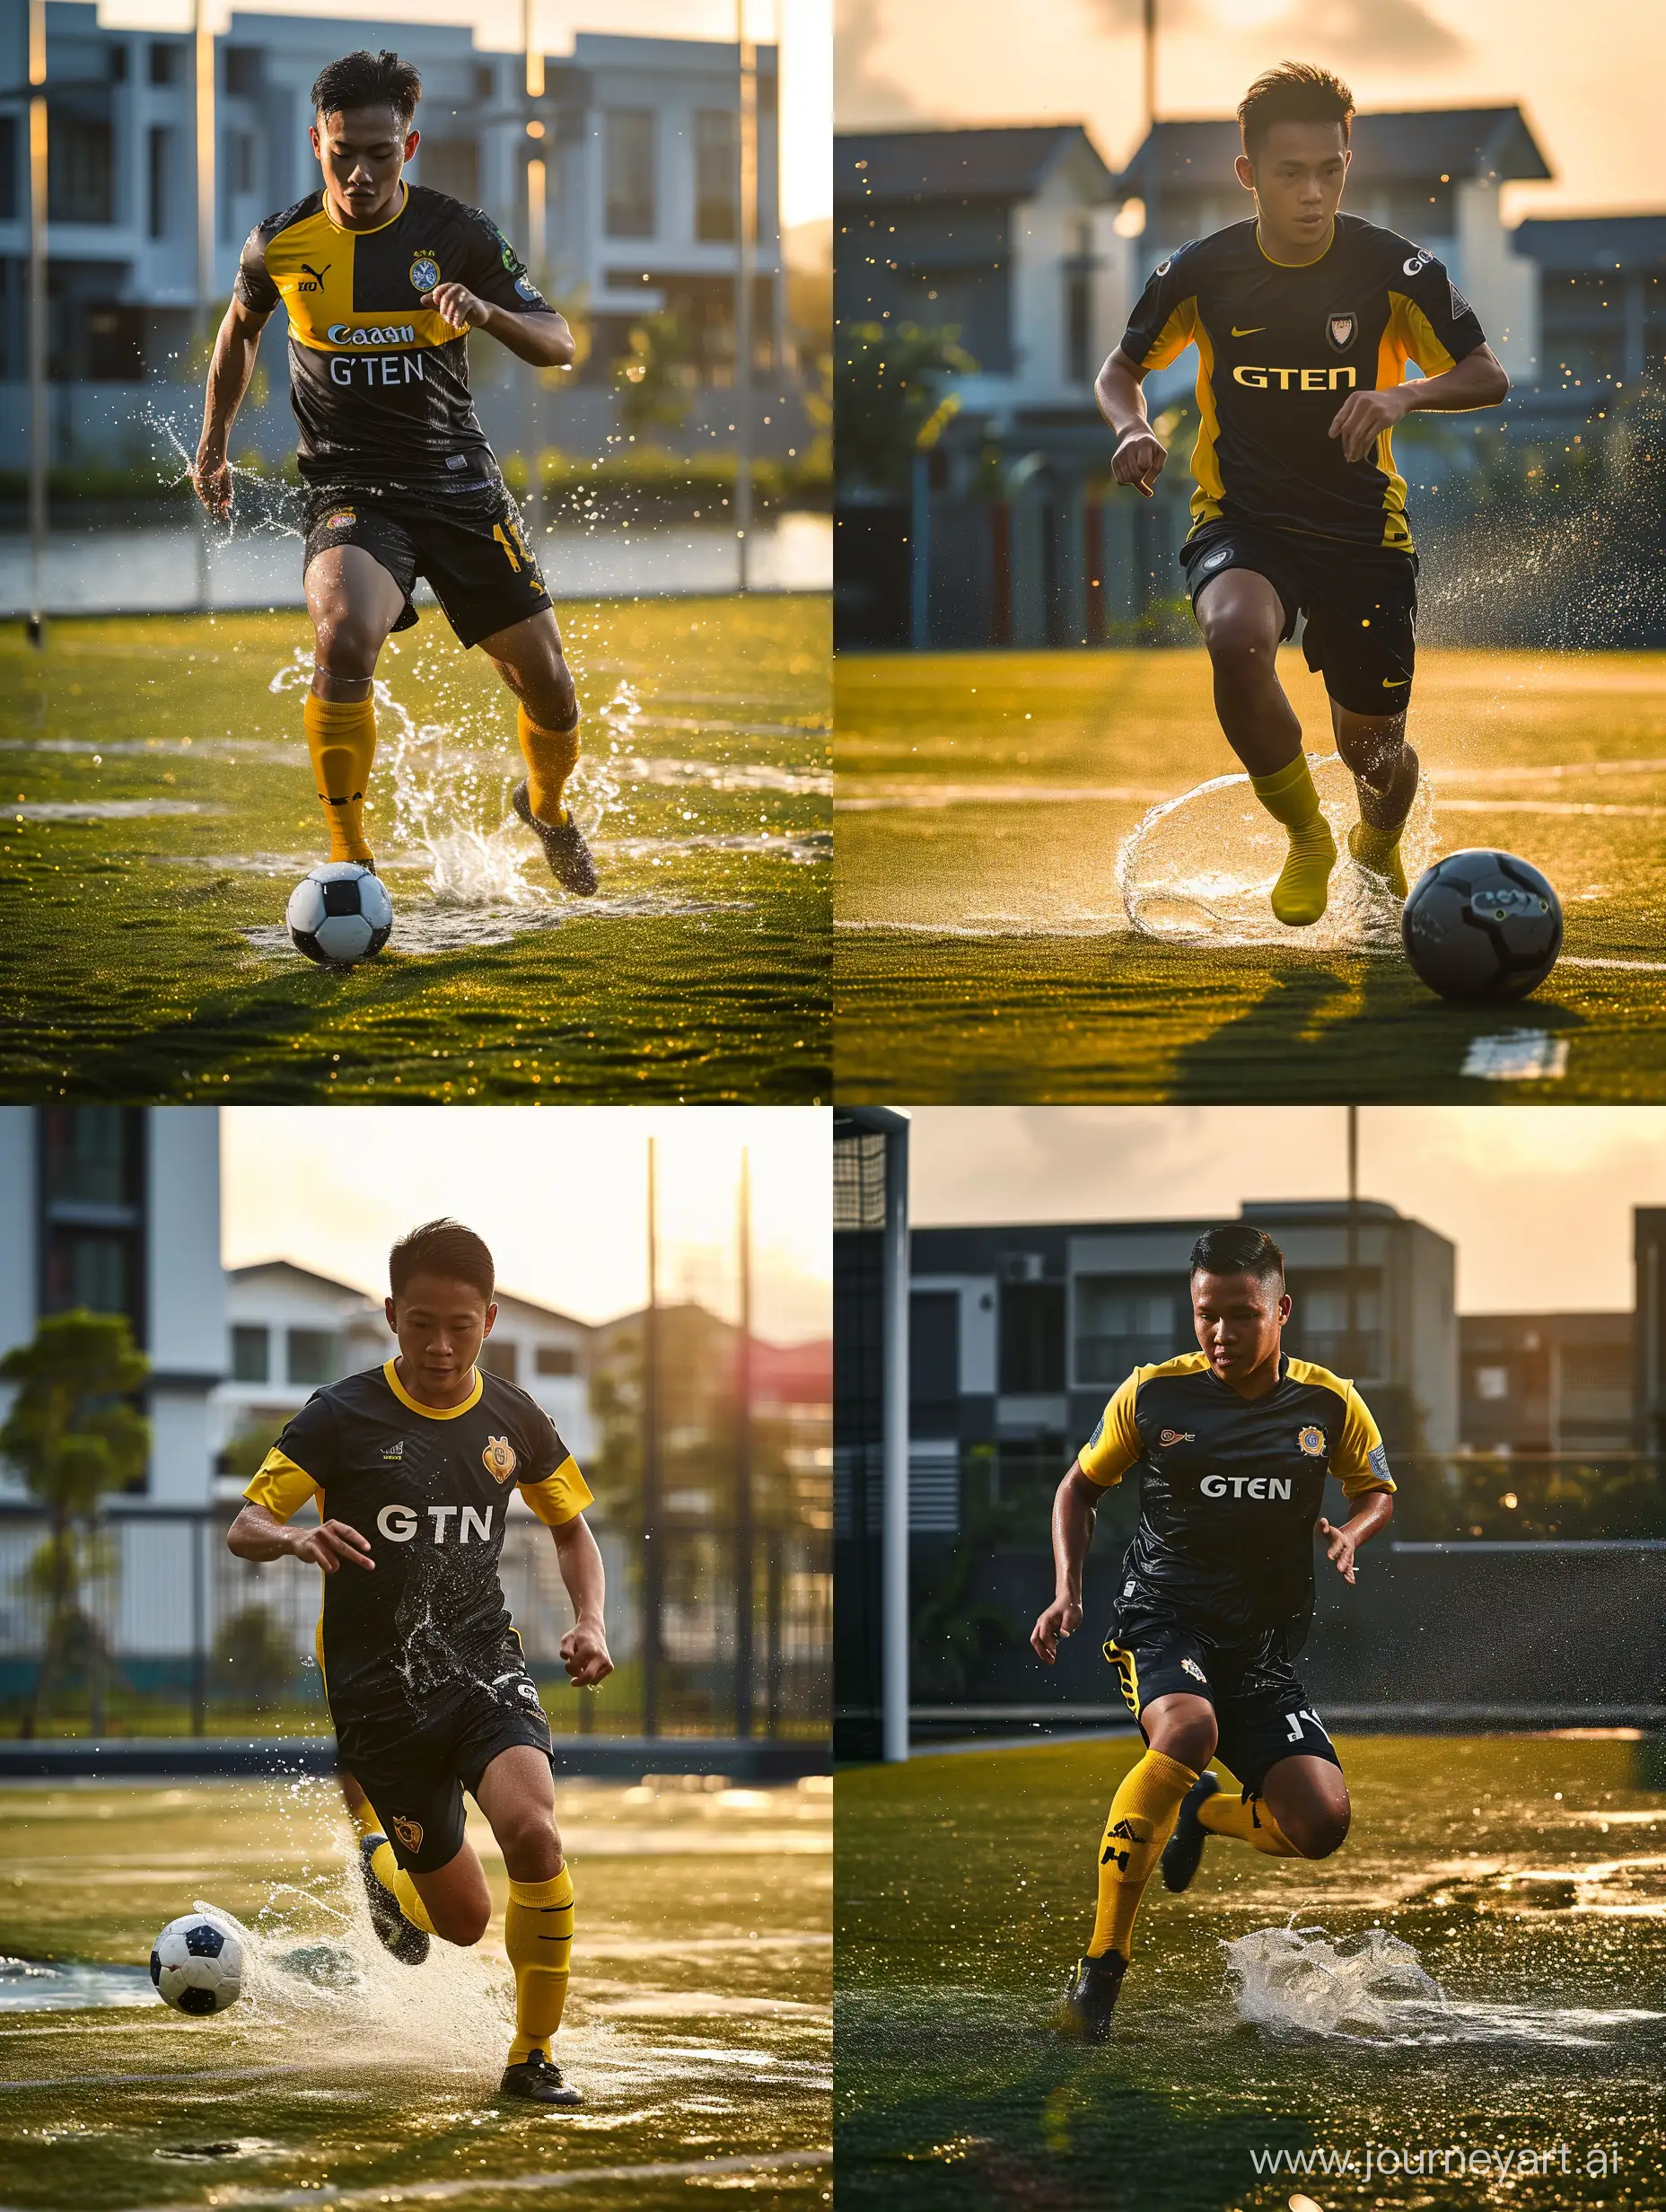 
ultra realistic a malay man runs while kicking a ball on a synthatic field. there is a splash of water. wearing a black and yellow shirt. the shirt has G-TEN FC written on it. yellow socks. sunlight in the evening. the background of a modern housing estate. canon eos-id x mark iii dslr --v 6.0